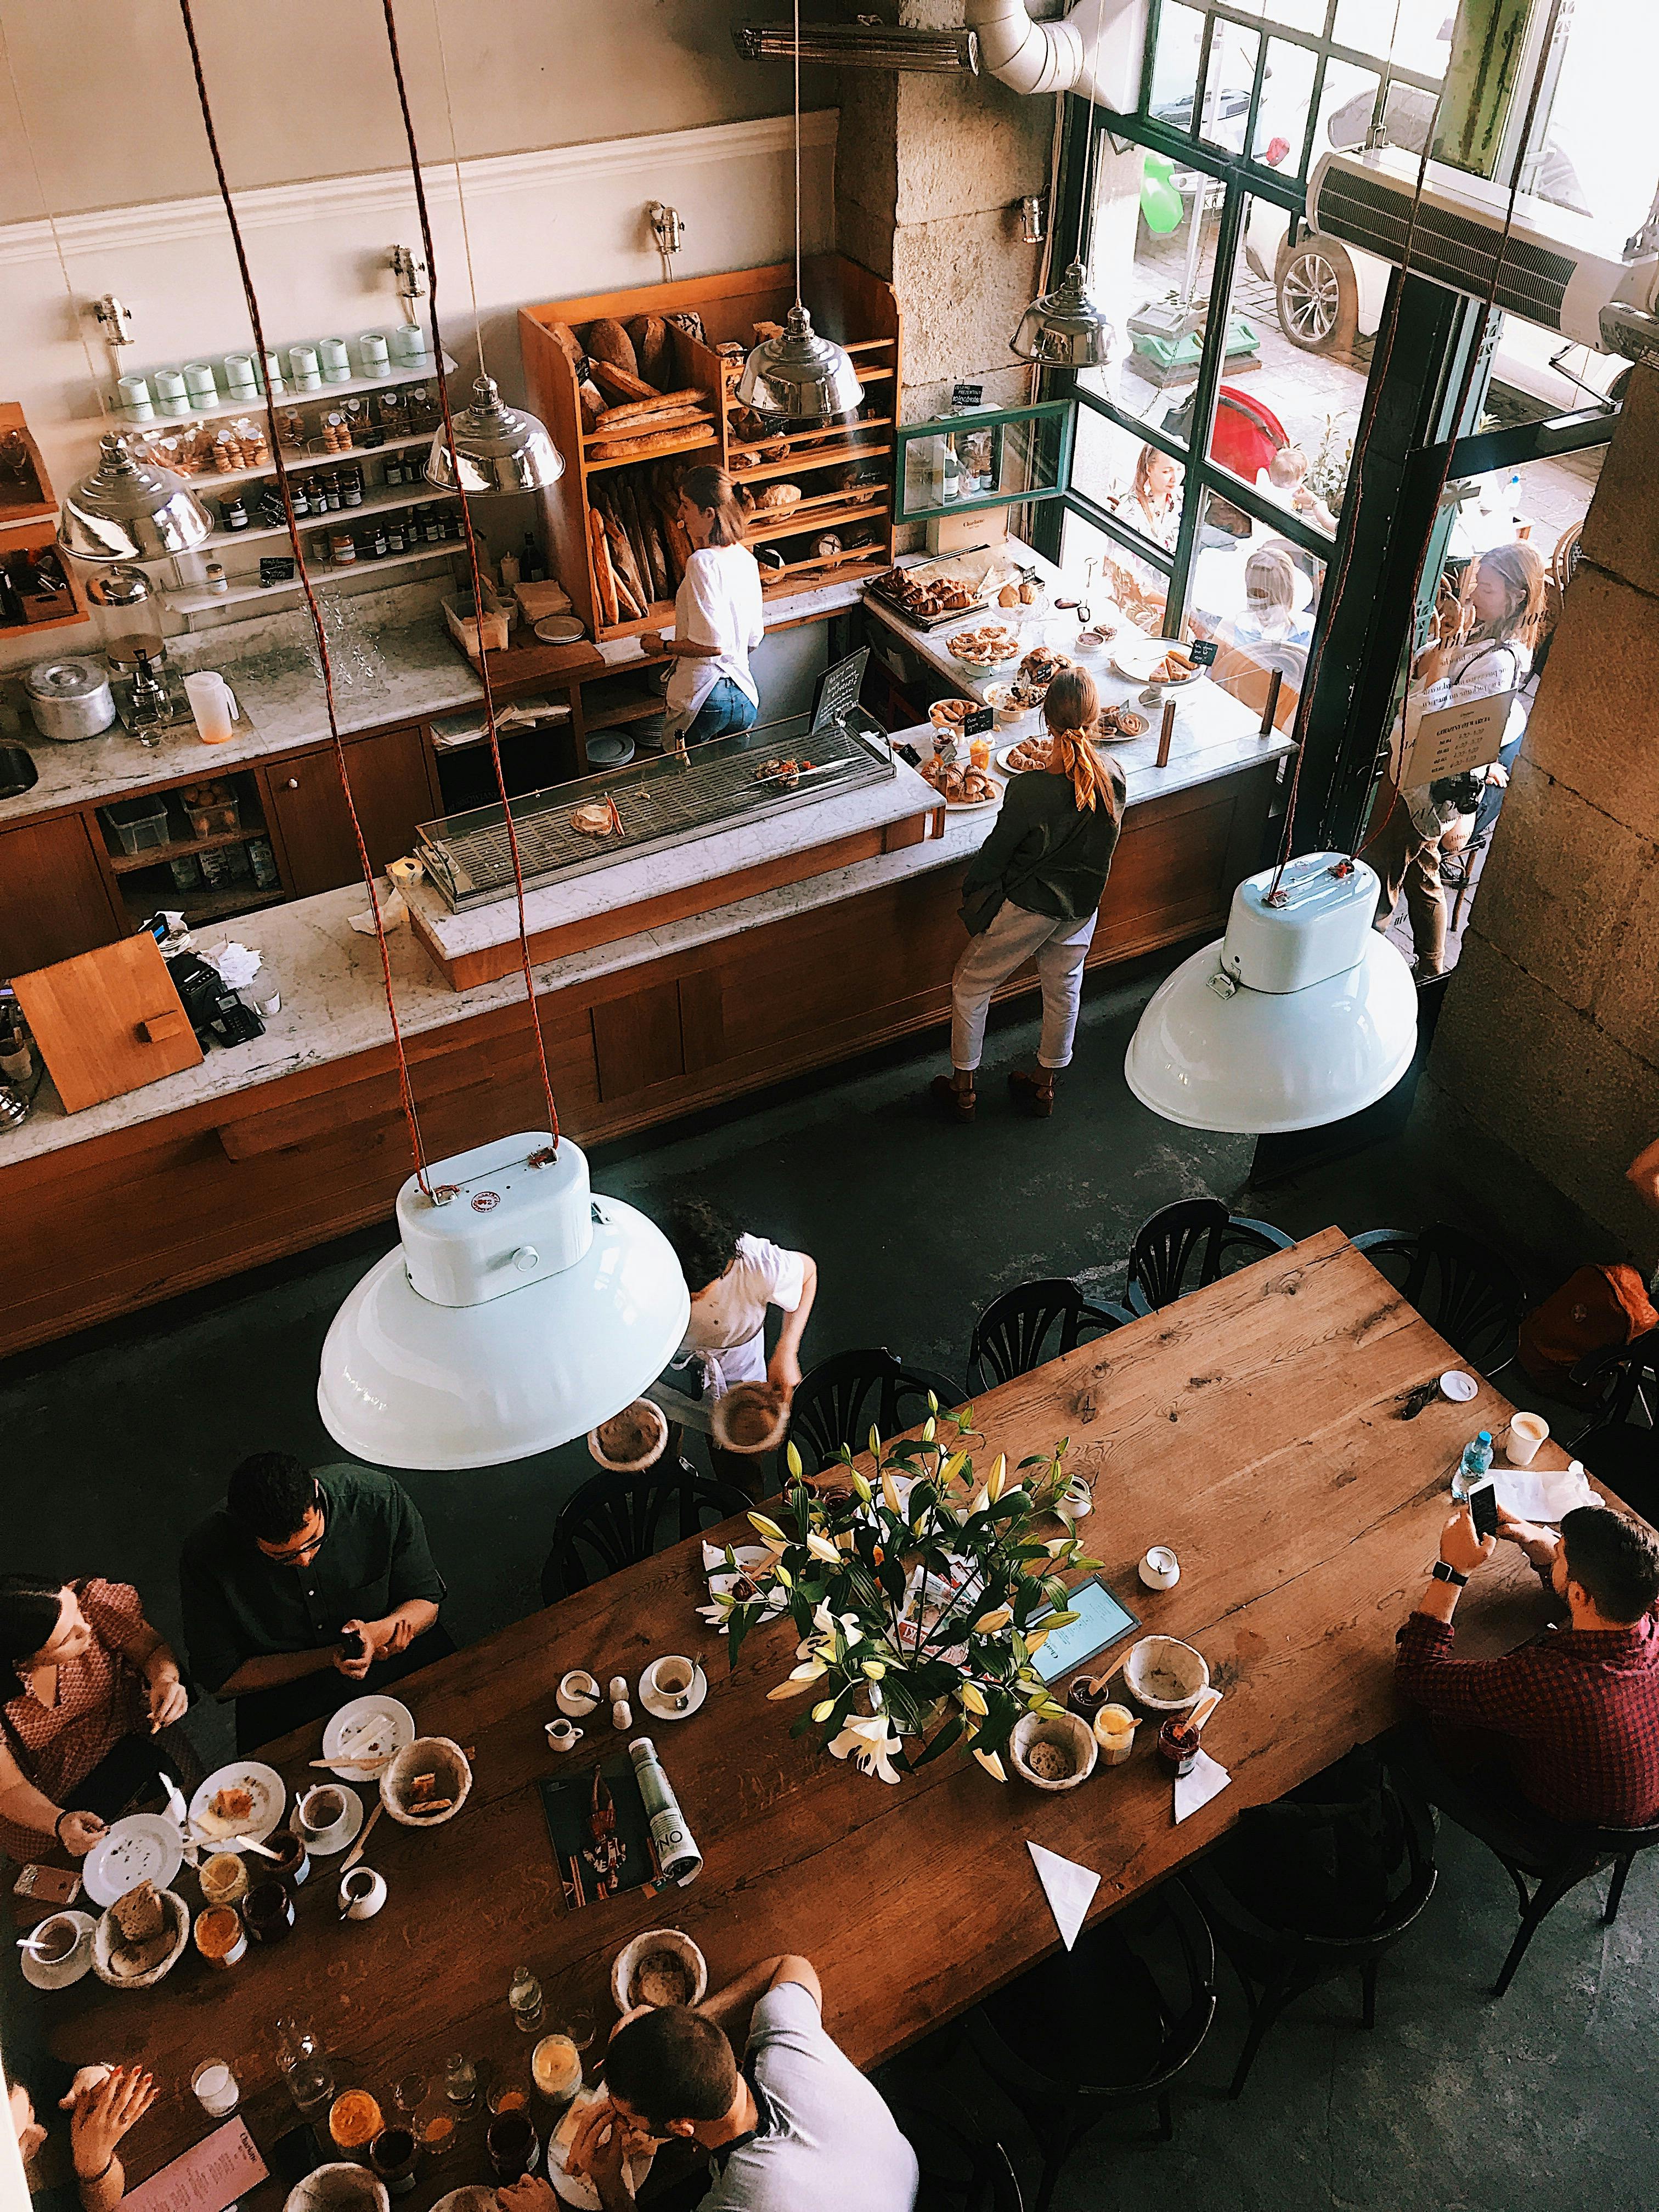 A communal table in a cafe | Source: Pexels